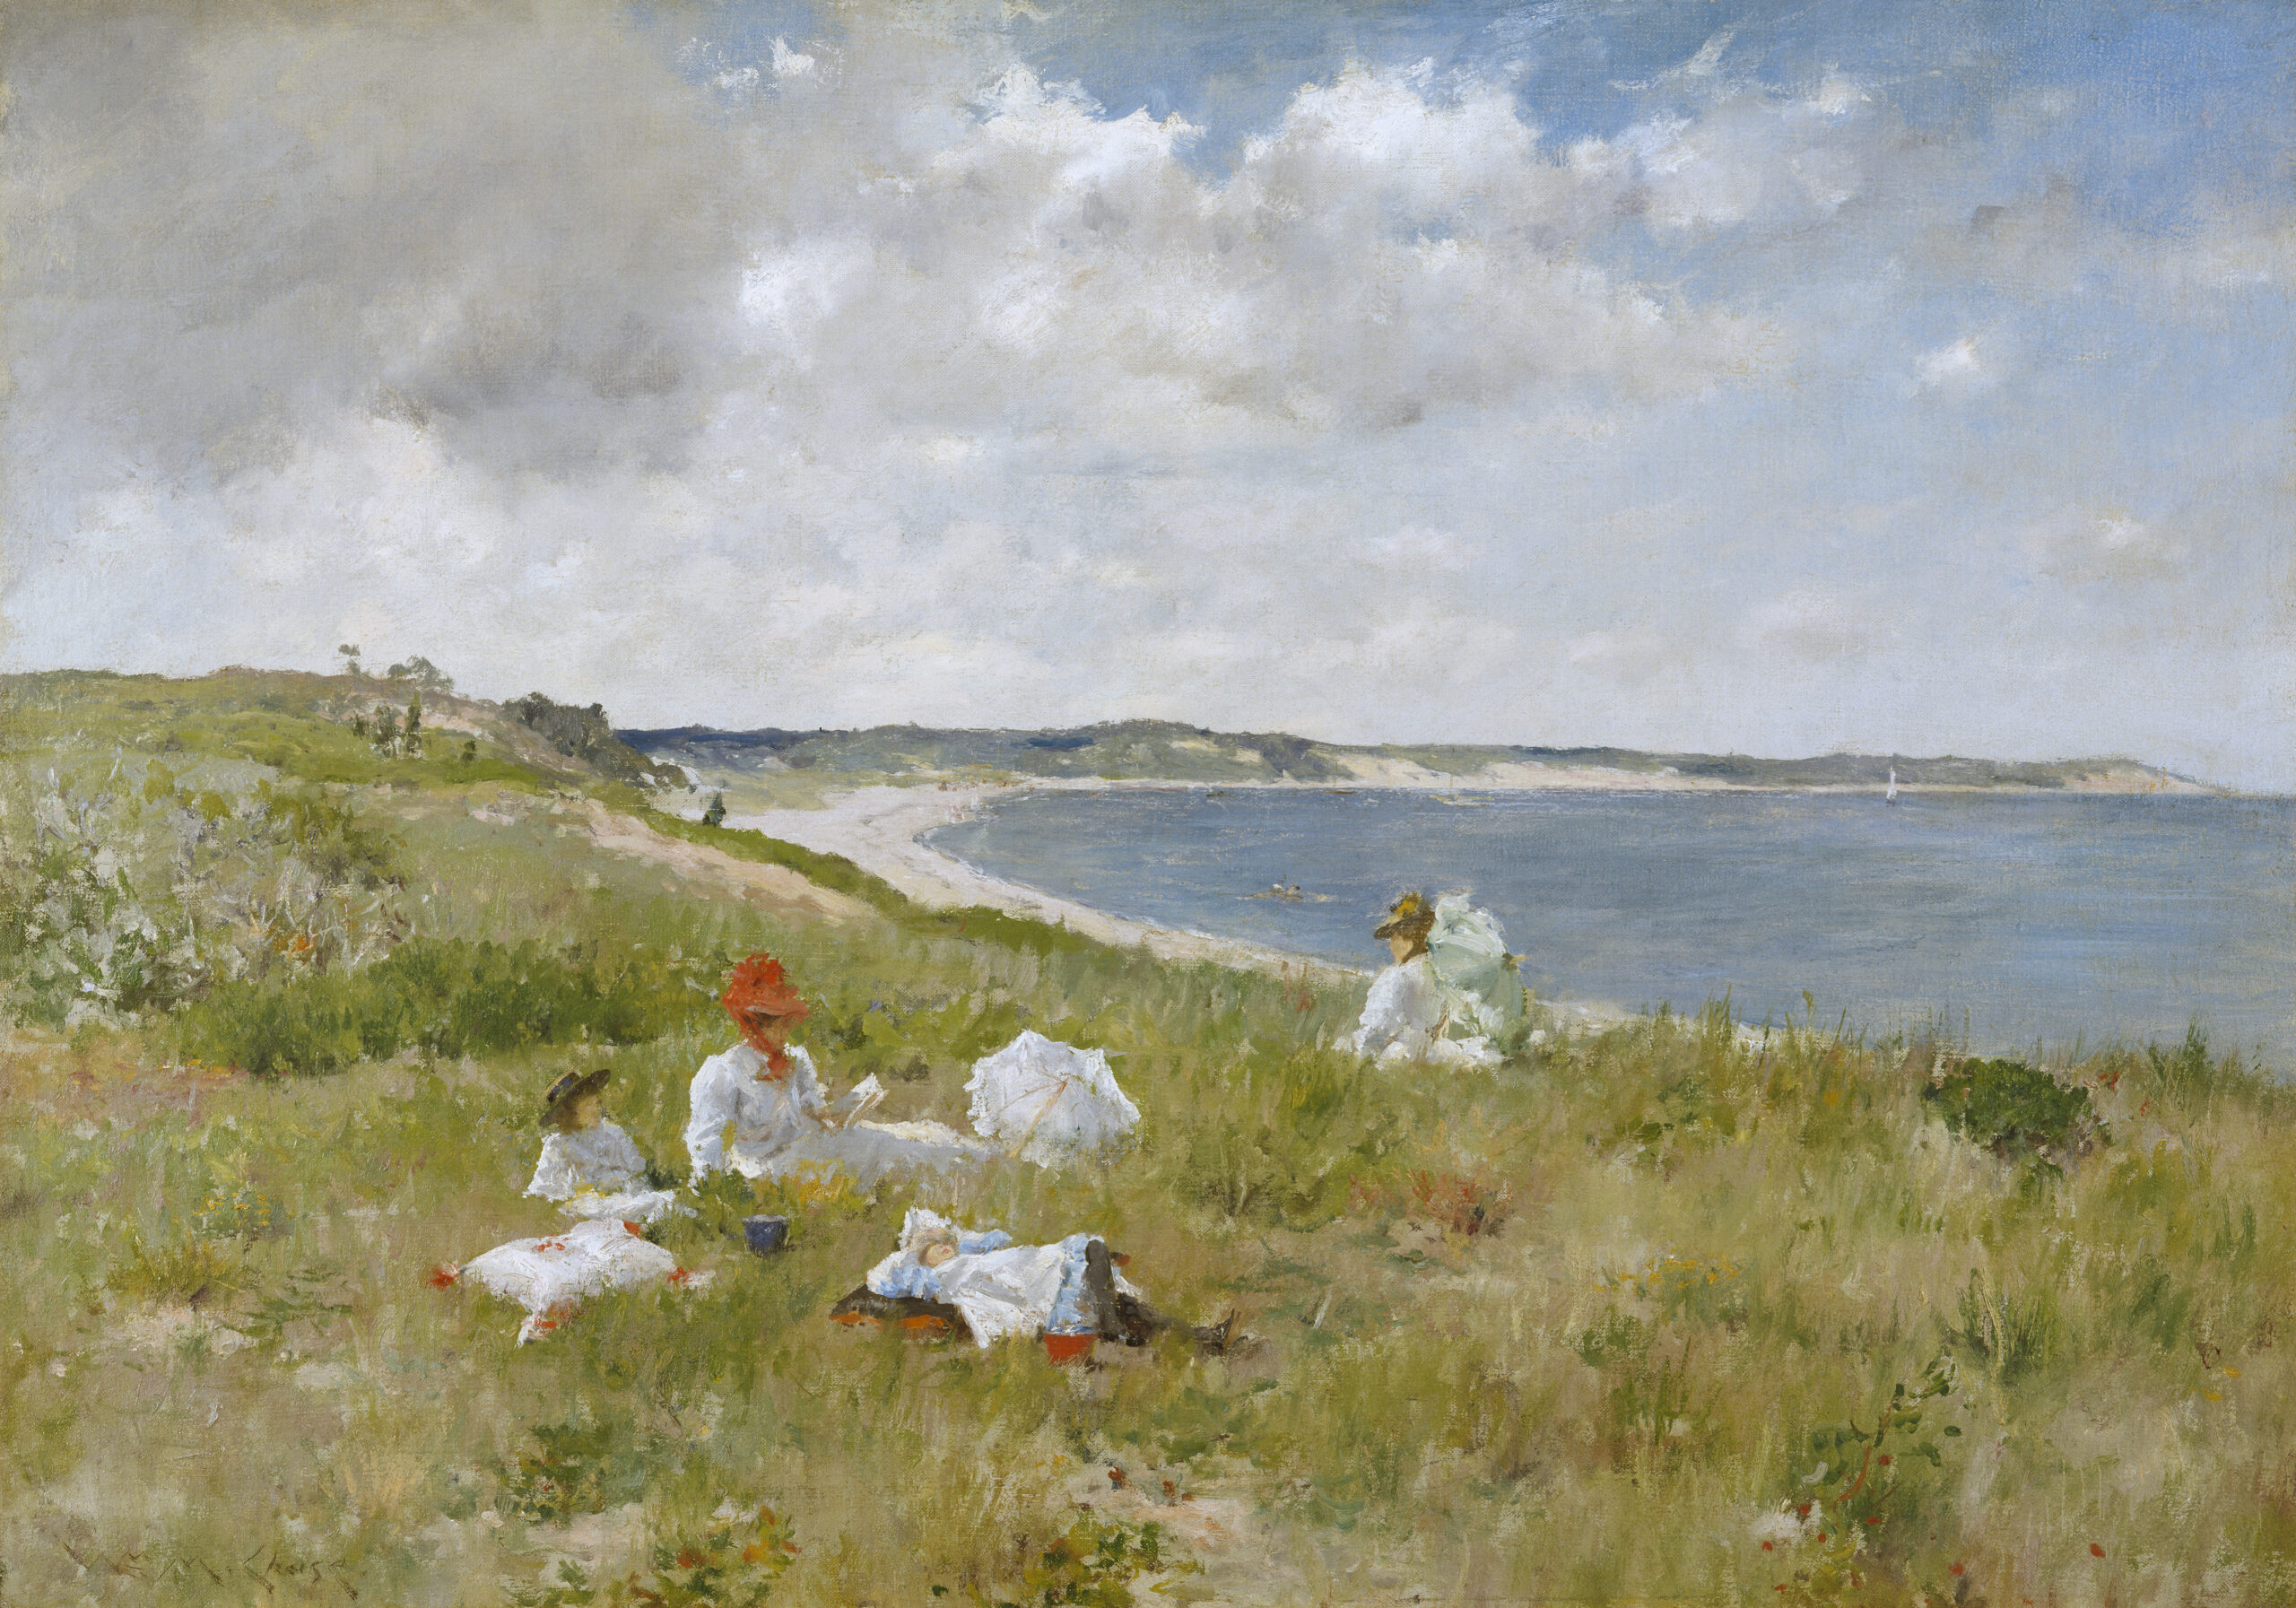 Idle Hours, ca. 1894, William Merritt Chase (American, 1849–1916), oil on canvas. Amon Carter Museum of Art, Fort Worth, Texas, 1982.1